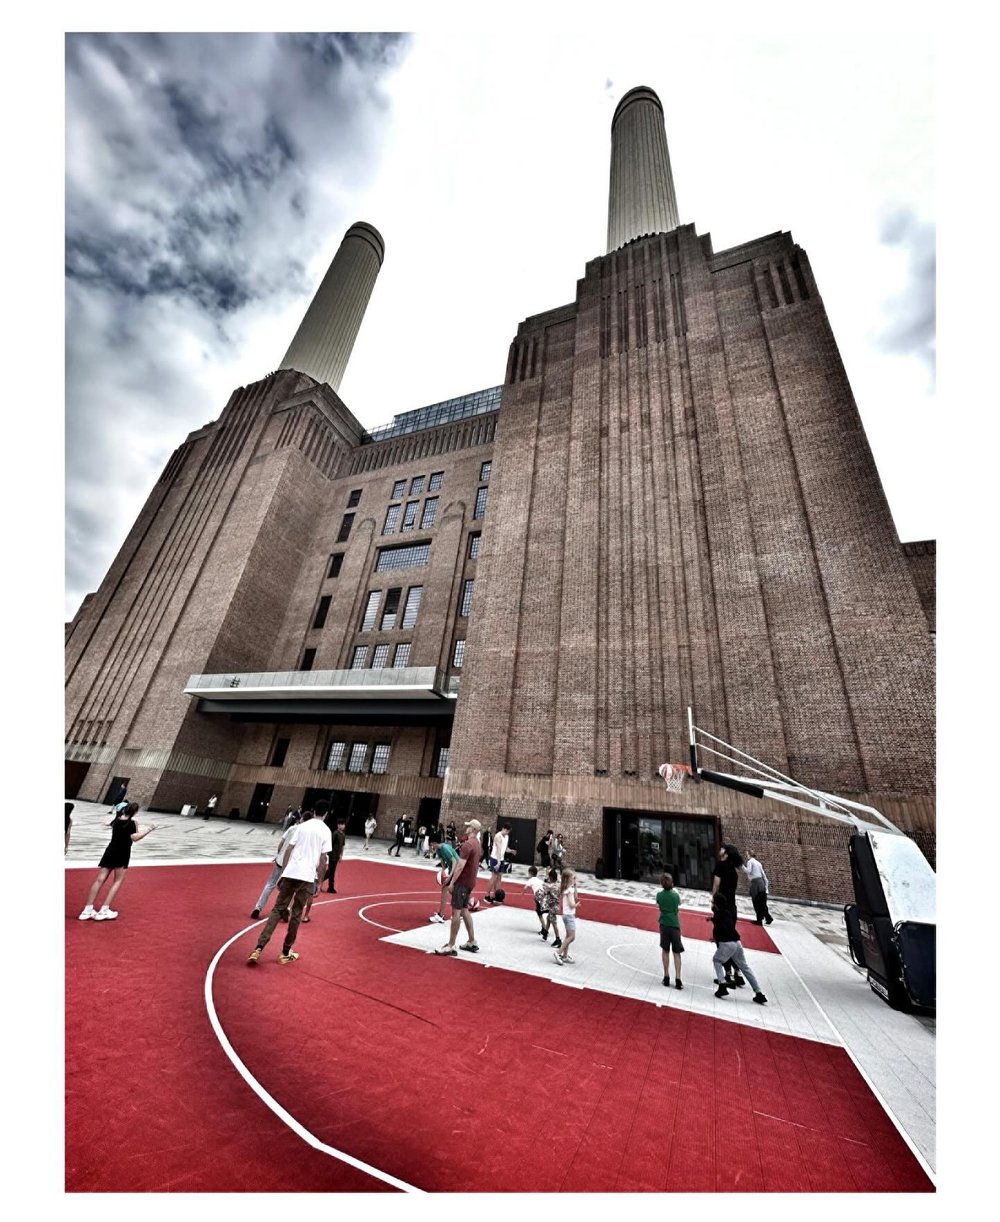 Back in London last year I visited Battersea Power Station. Bricks and mortar that honour history and with a chimney lift-shaft, encircling shared street and basketball courts engage with the city in a new way. We&rsquo;re lucky in Sydney that we can